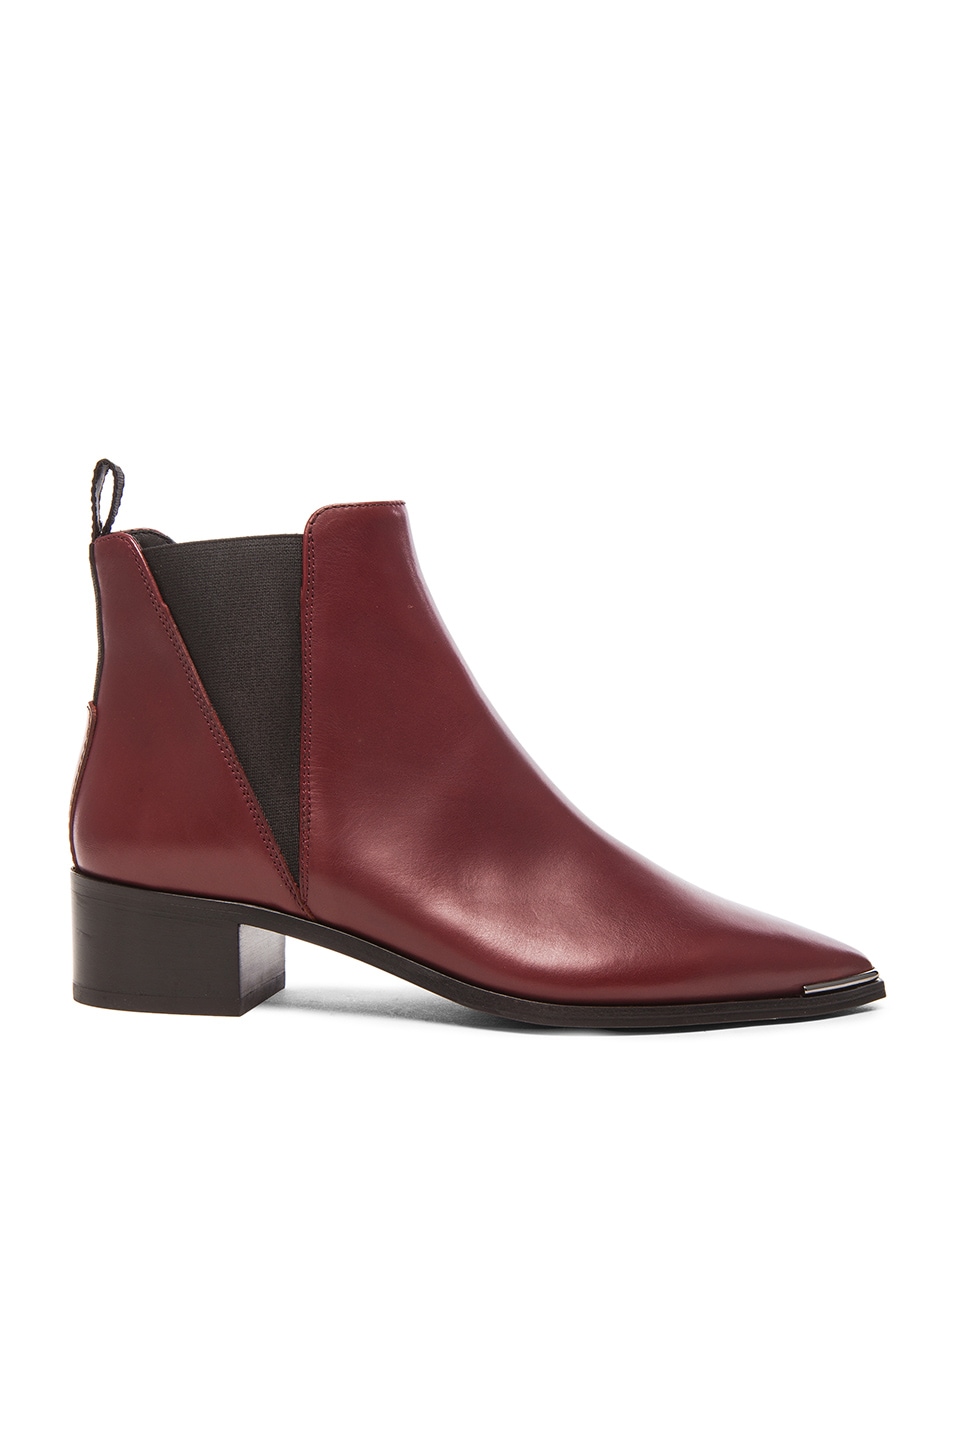 Image 1 of Acne Studios Jenson Leather Booties in Bordeaux